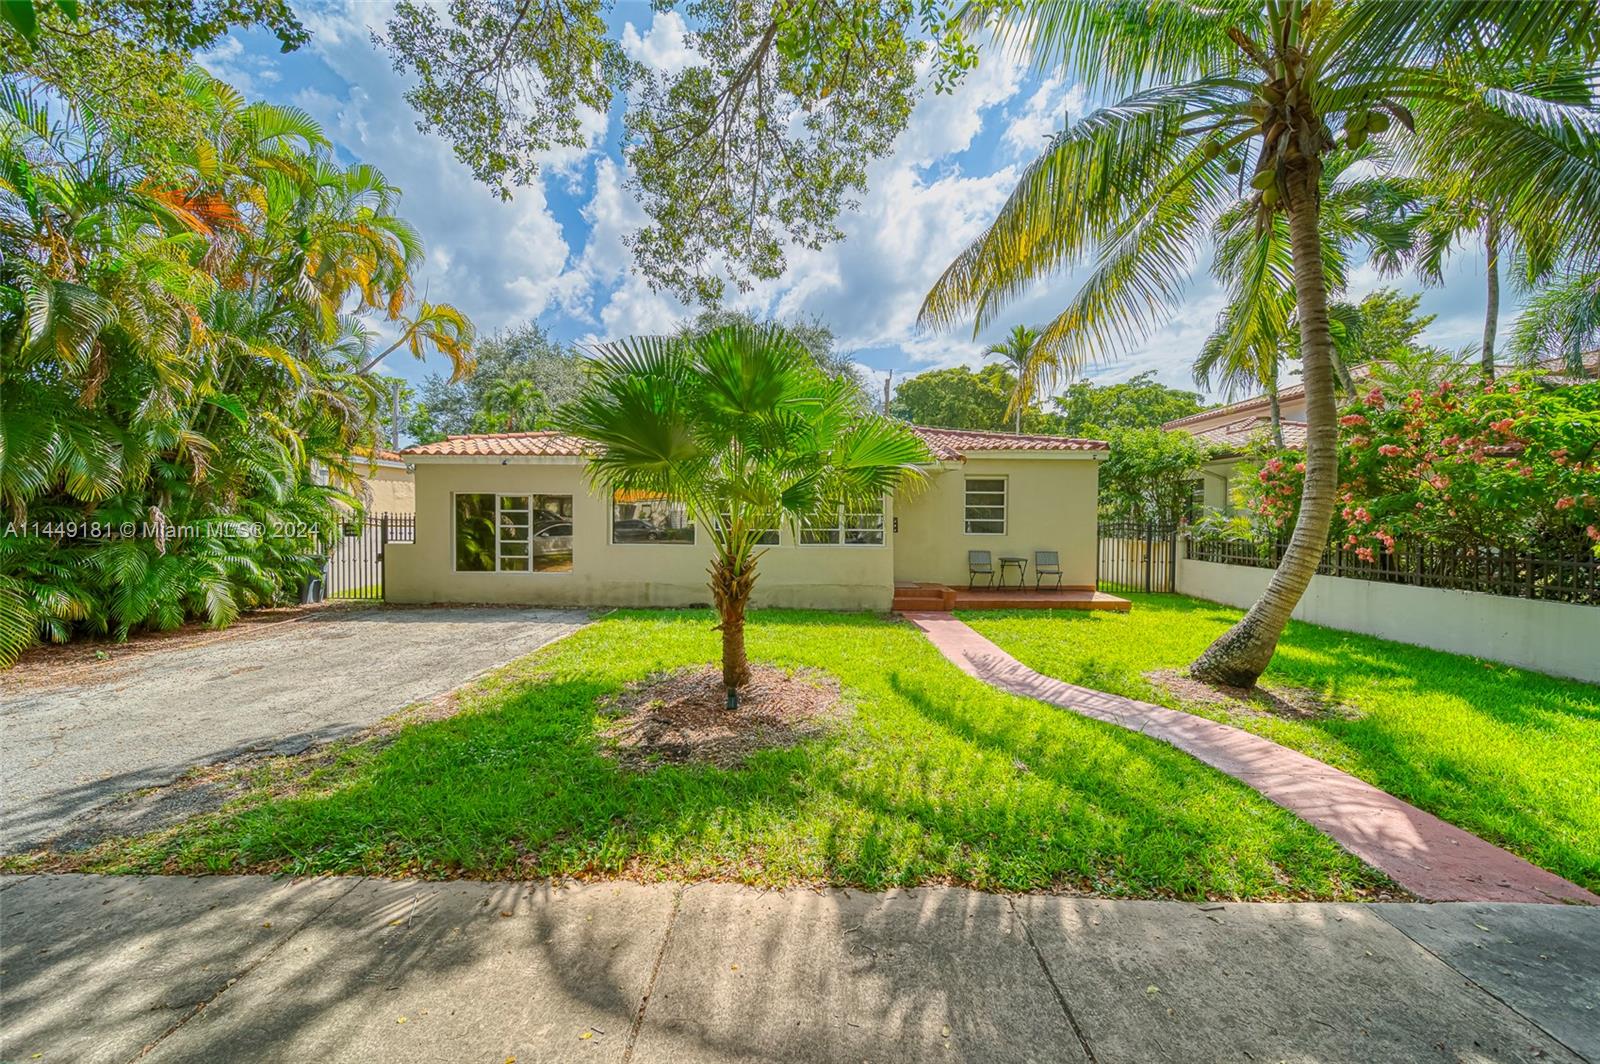 817 Alberca St, Coral Gables, FL 33134, 3 Bedrooms Bedrooms, ,2 BathroomsBathrooms,Residential,For Sale,Alberca St,A11449181